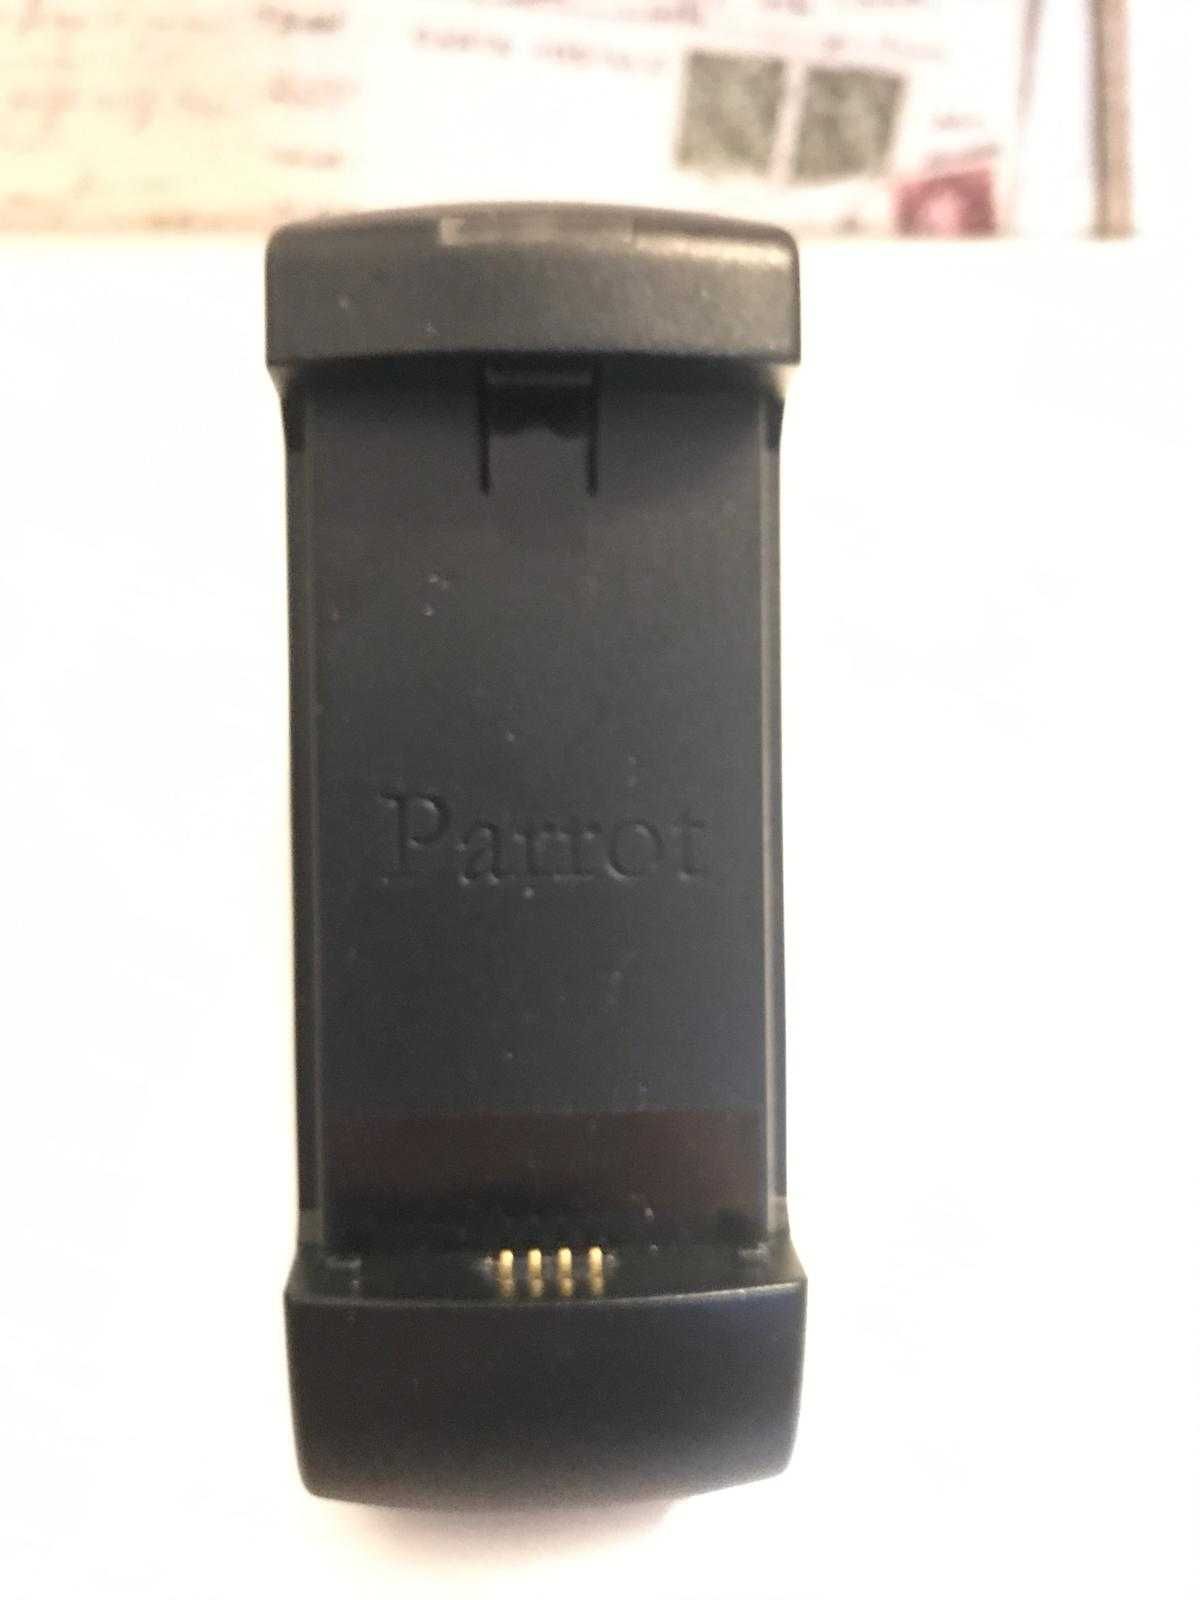 Parrot charger drona